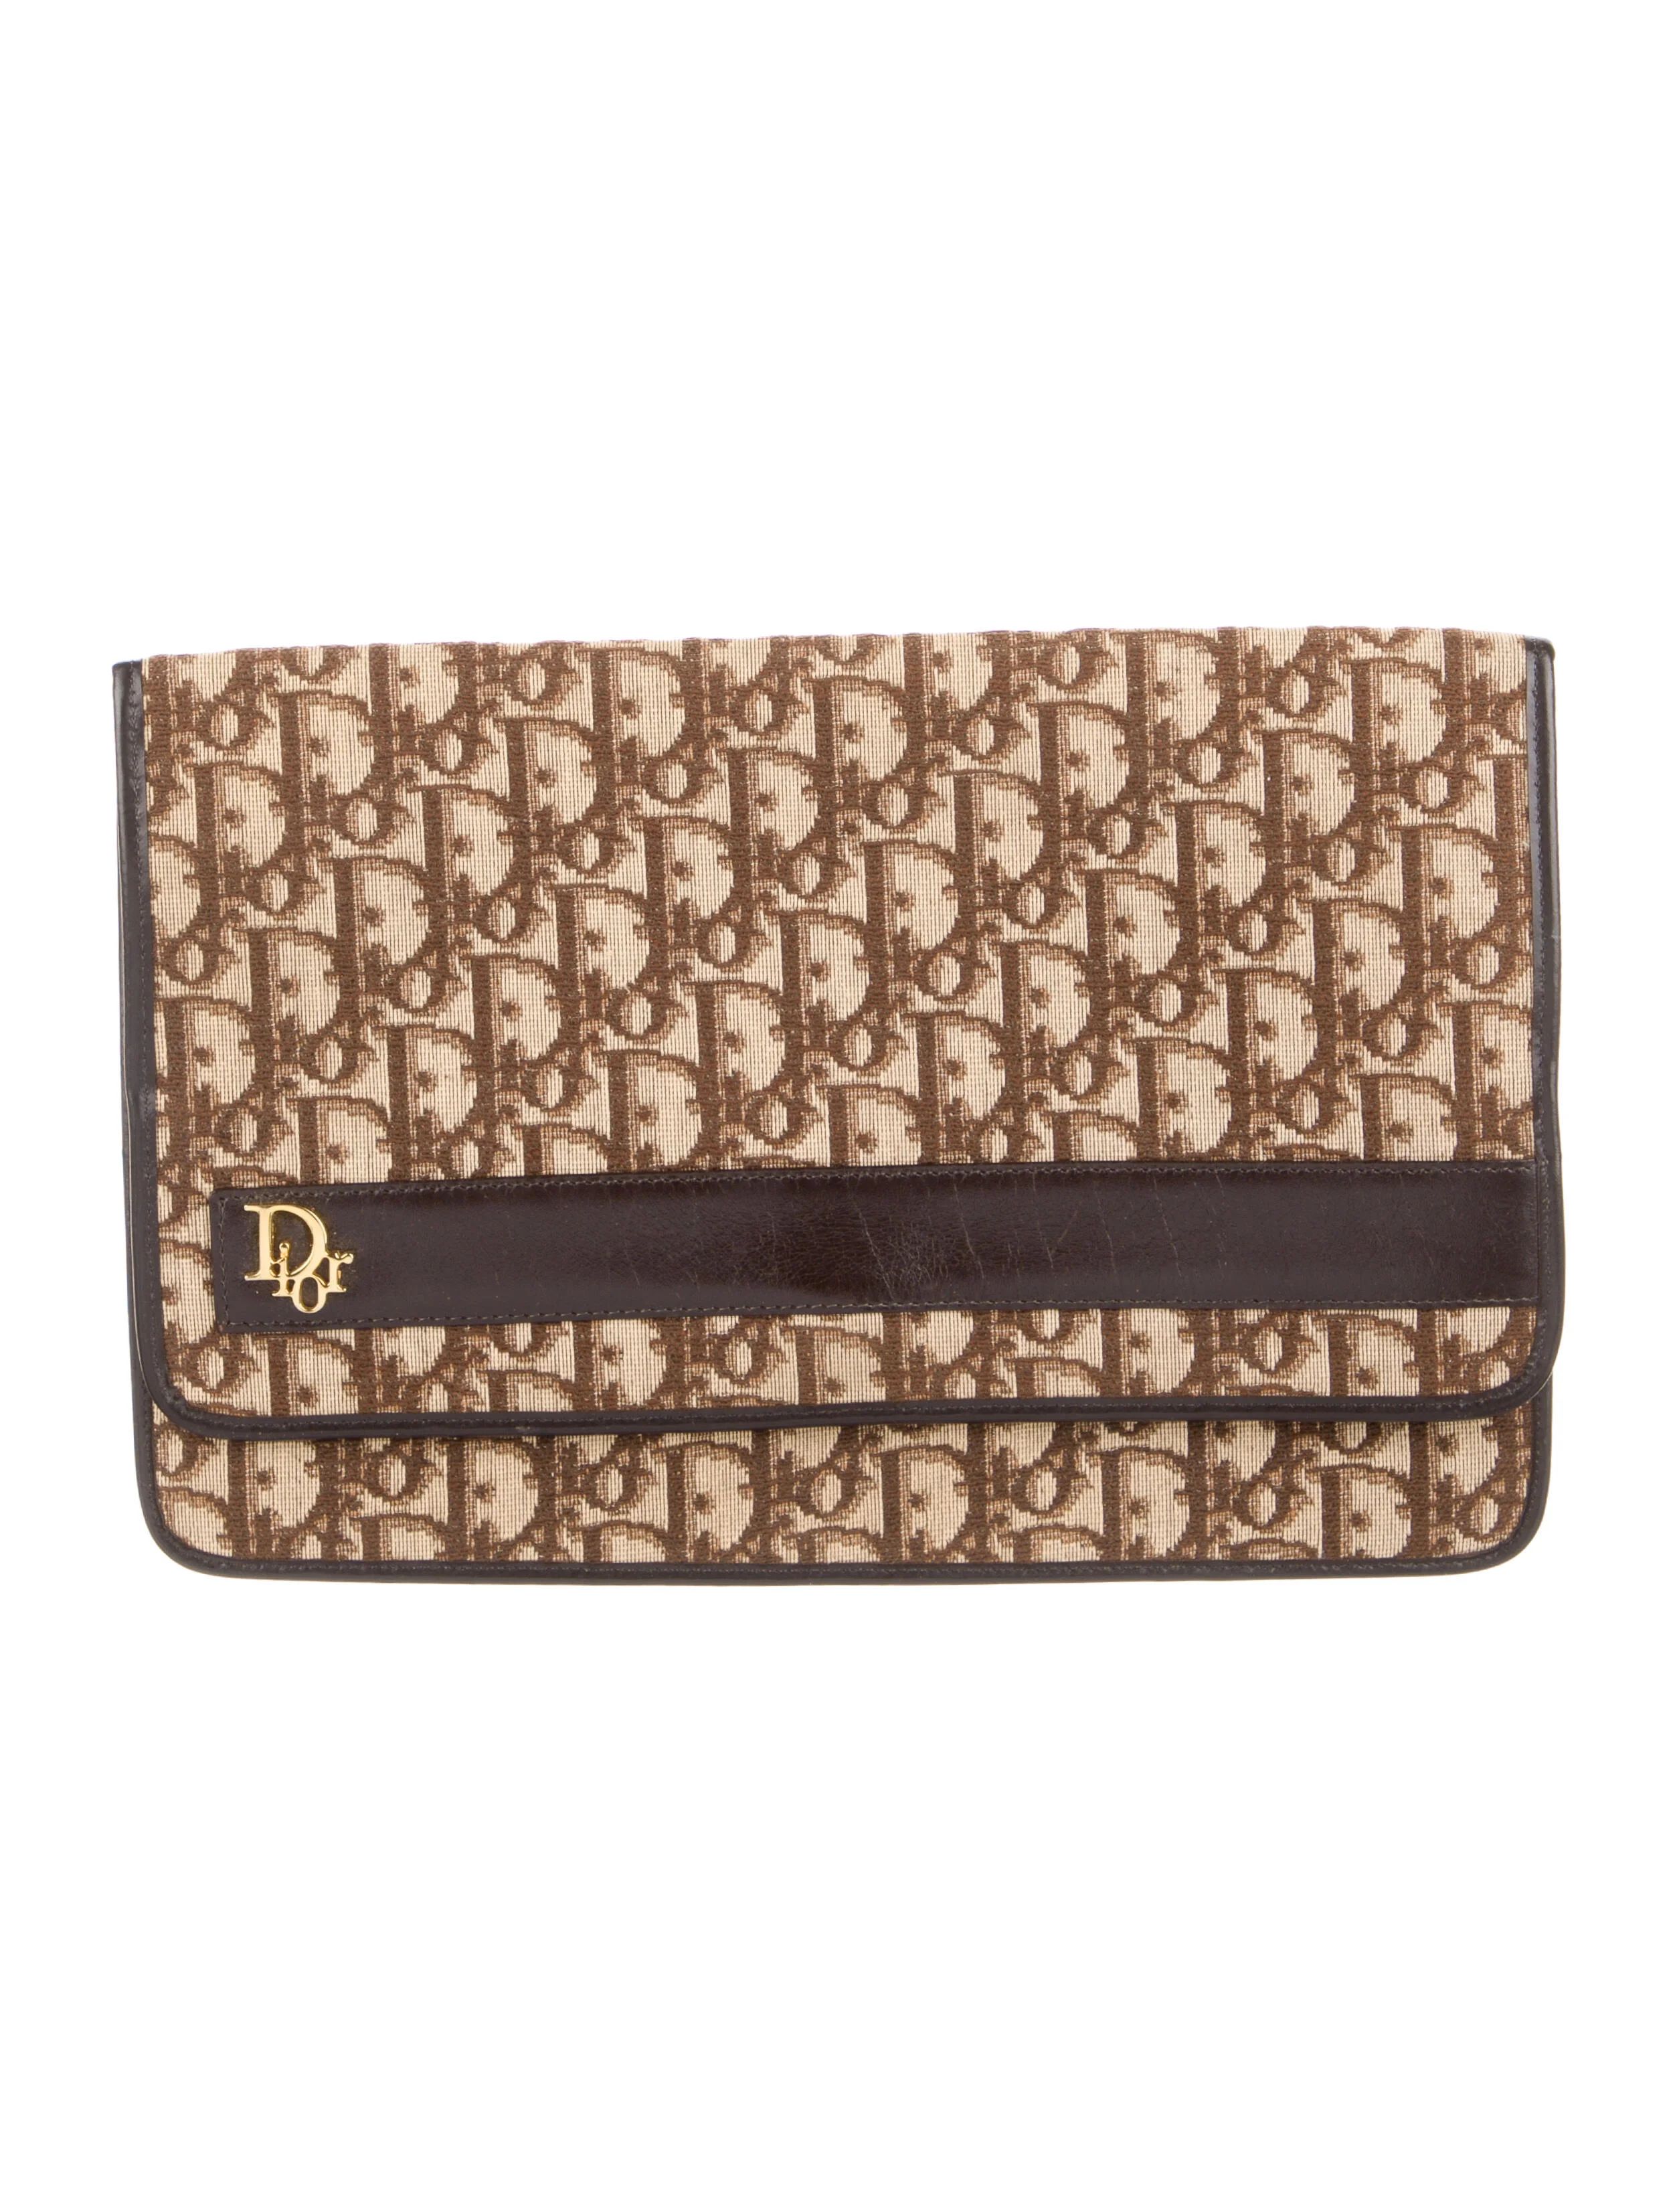 Vintage Diorissimo Flap Clutch | The RealReal